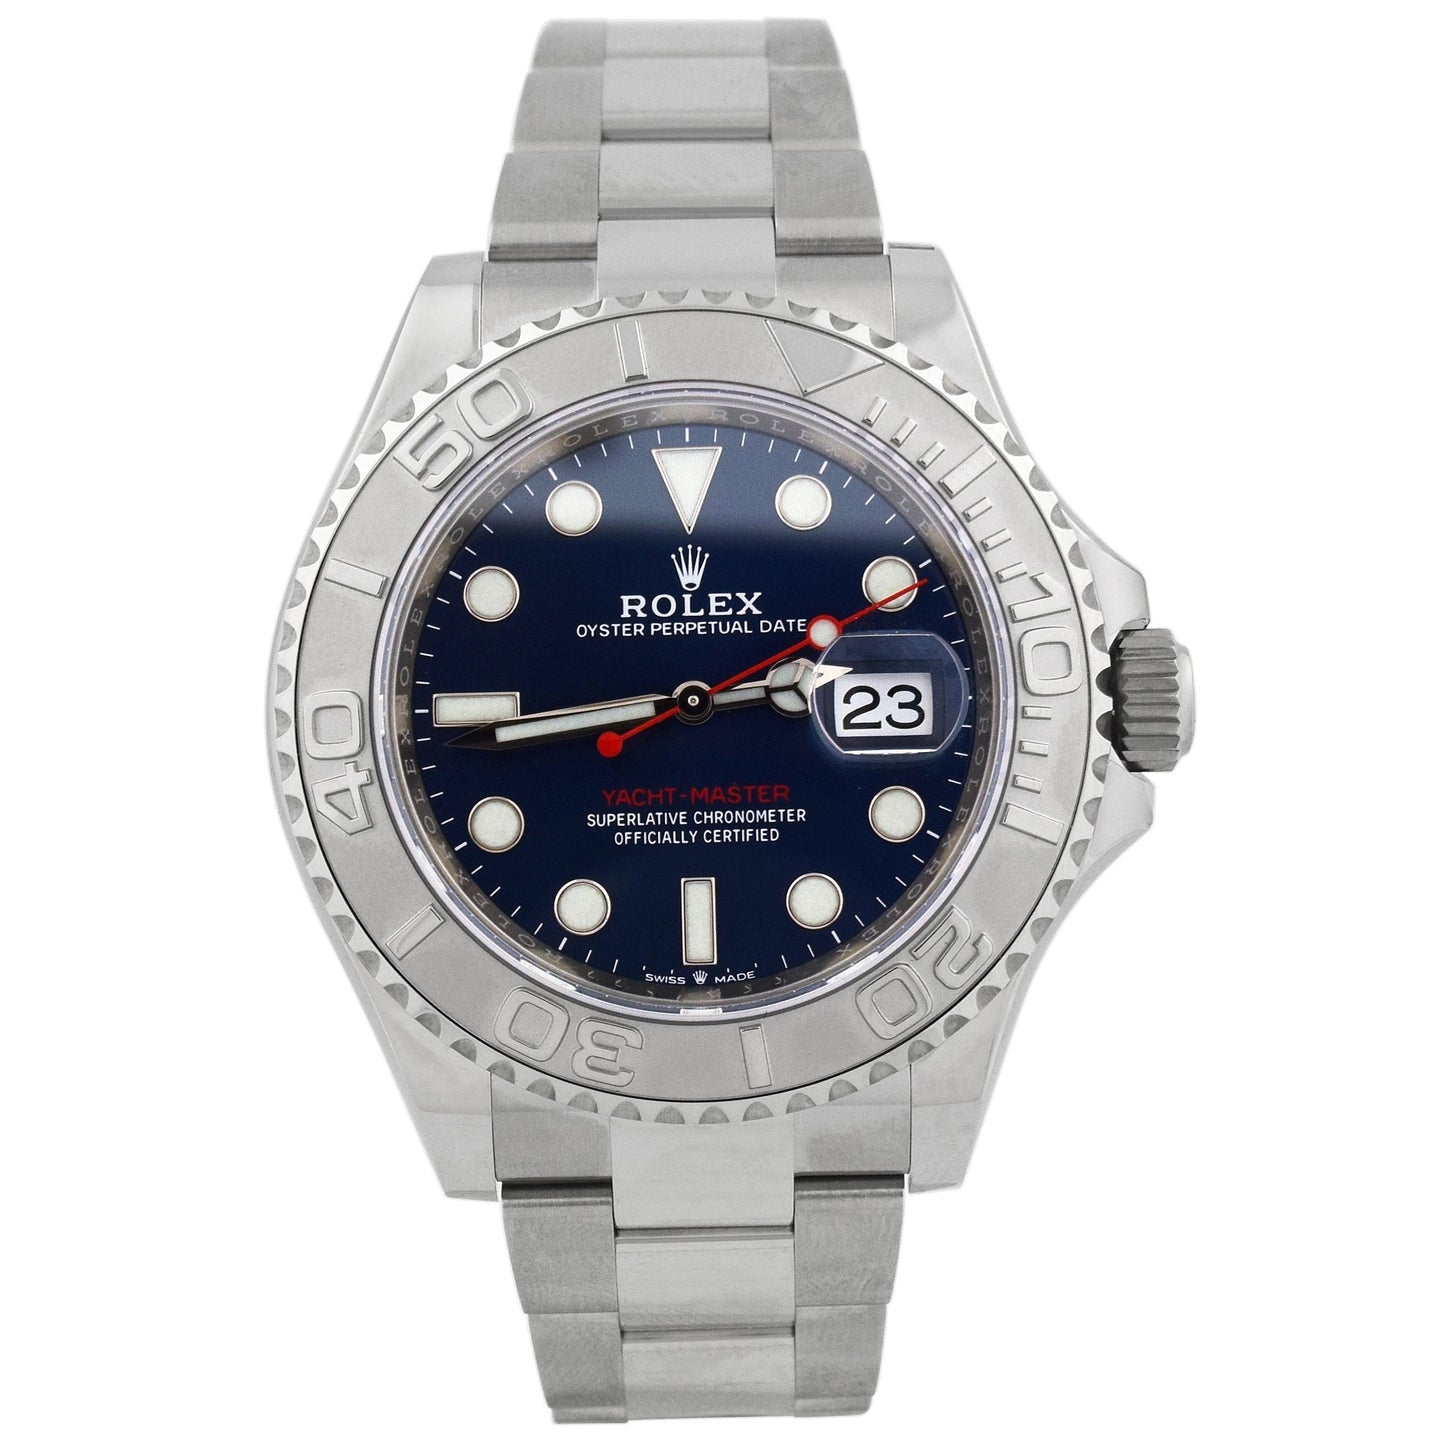 Rolex Men's Yacht-Master Stainless Steel & Platinum 40mm Blue Dot Dial Watch Reference #: 116622 - Happy Jewelers Fine Jewelry Lifetime Warranty